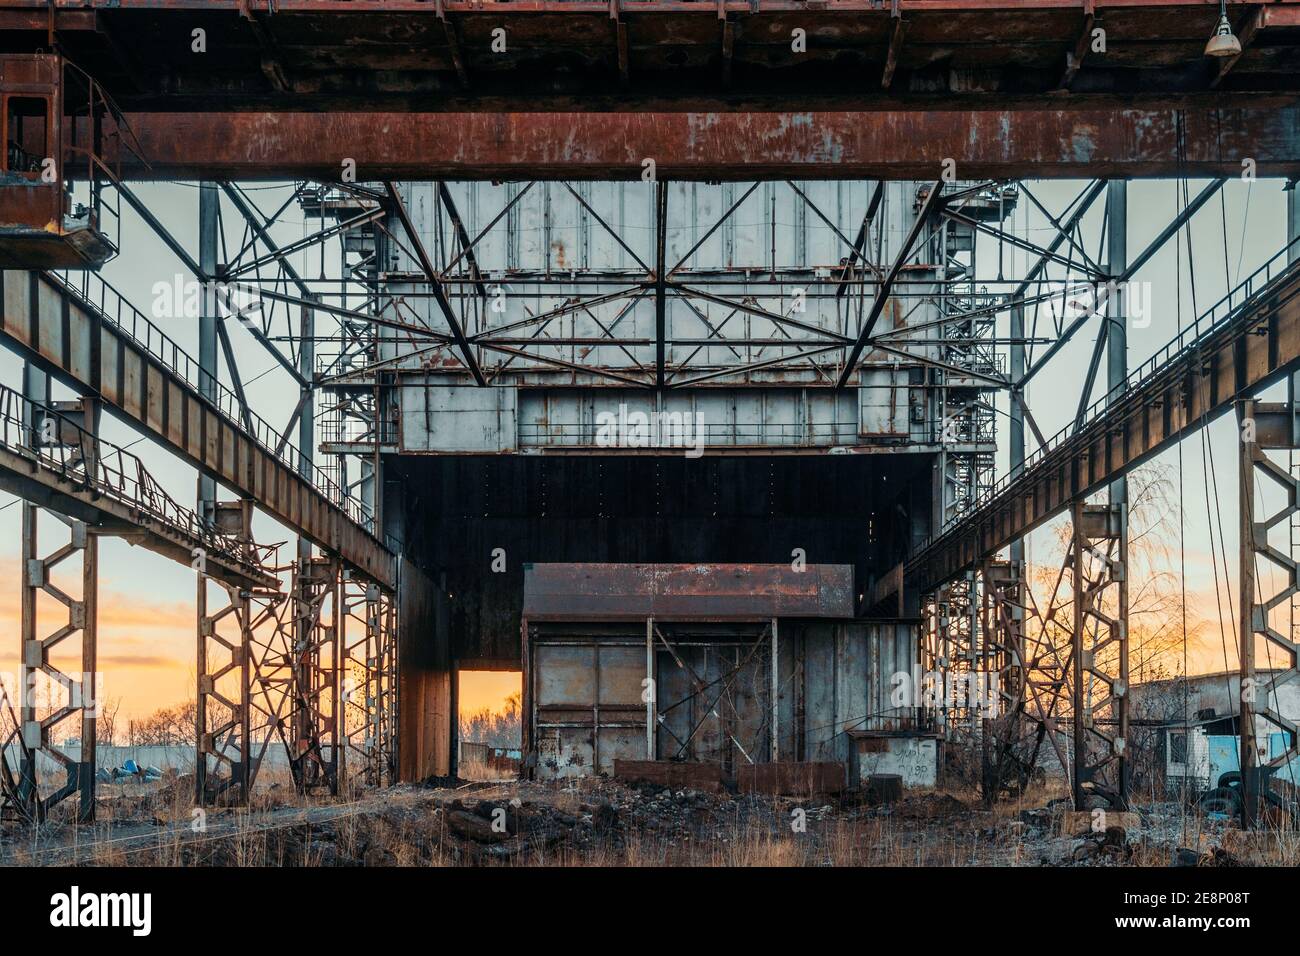 Old abandoned industrial building of metallurgy industry forgotten and waiting for demolition. Stock Photo